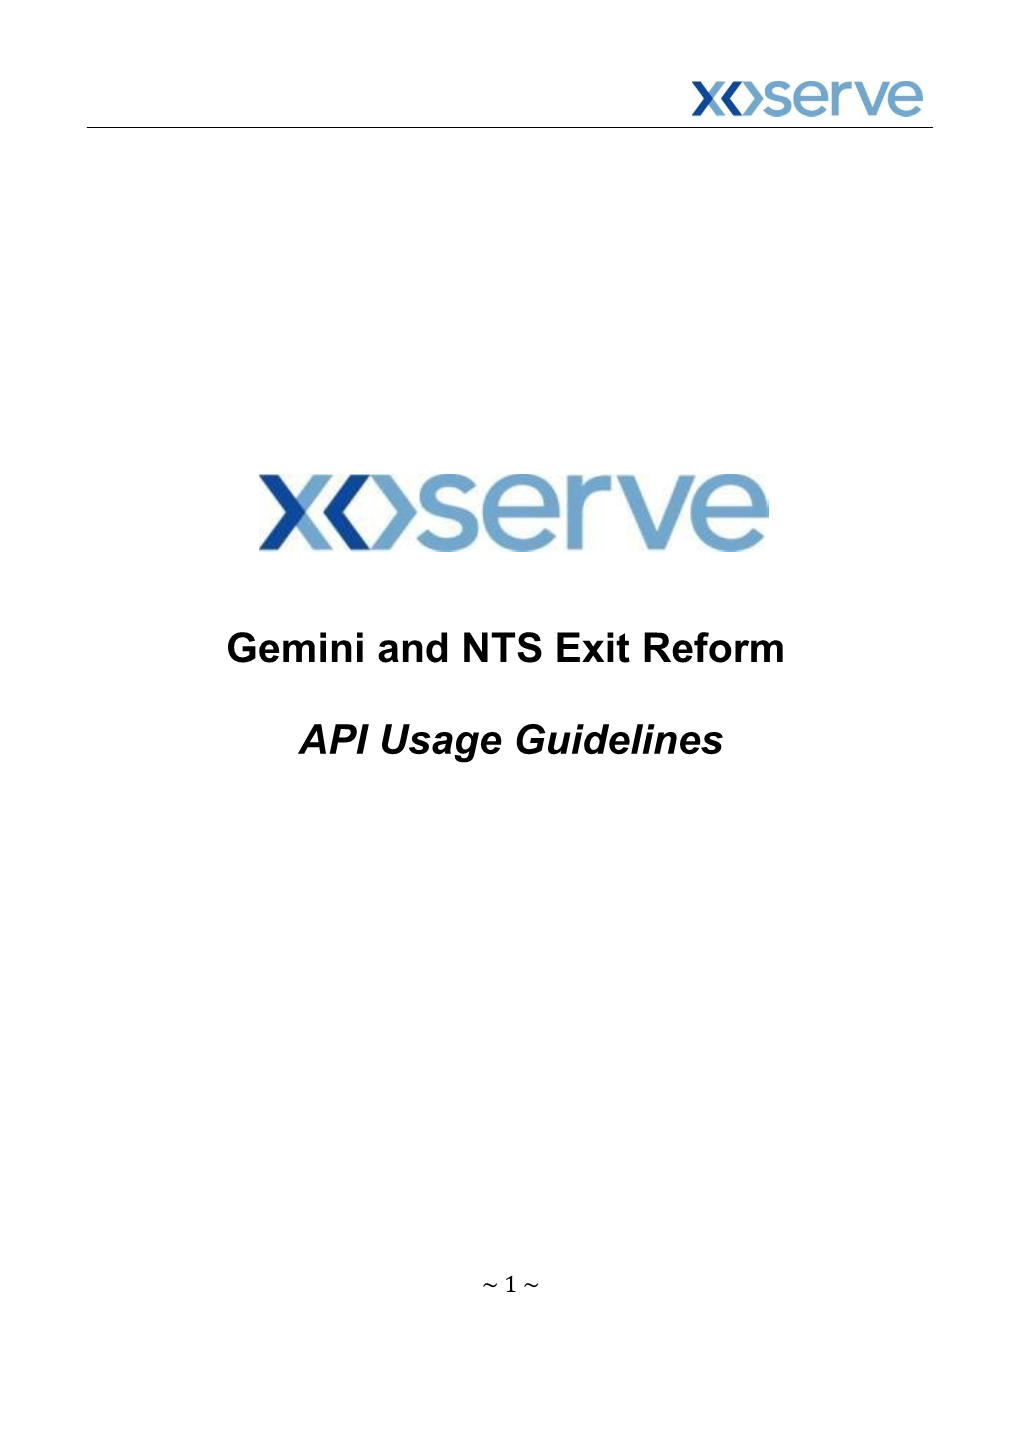 Gemini and NTS Exit Reform API Usage Guidelines